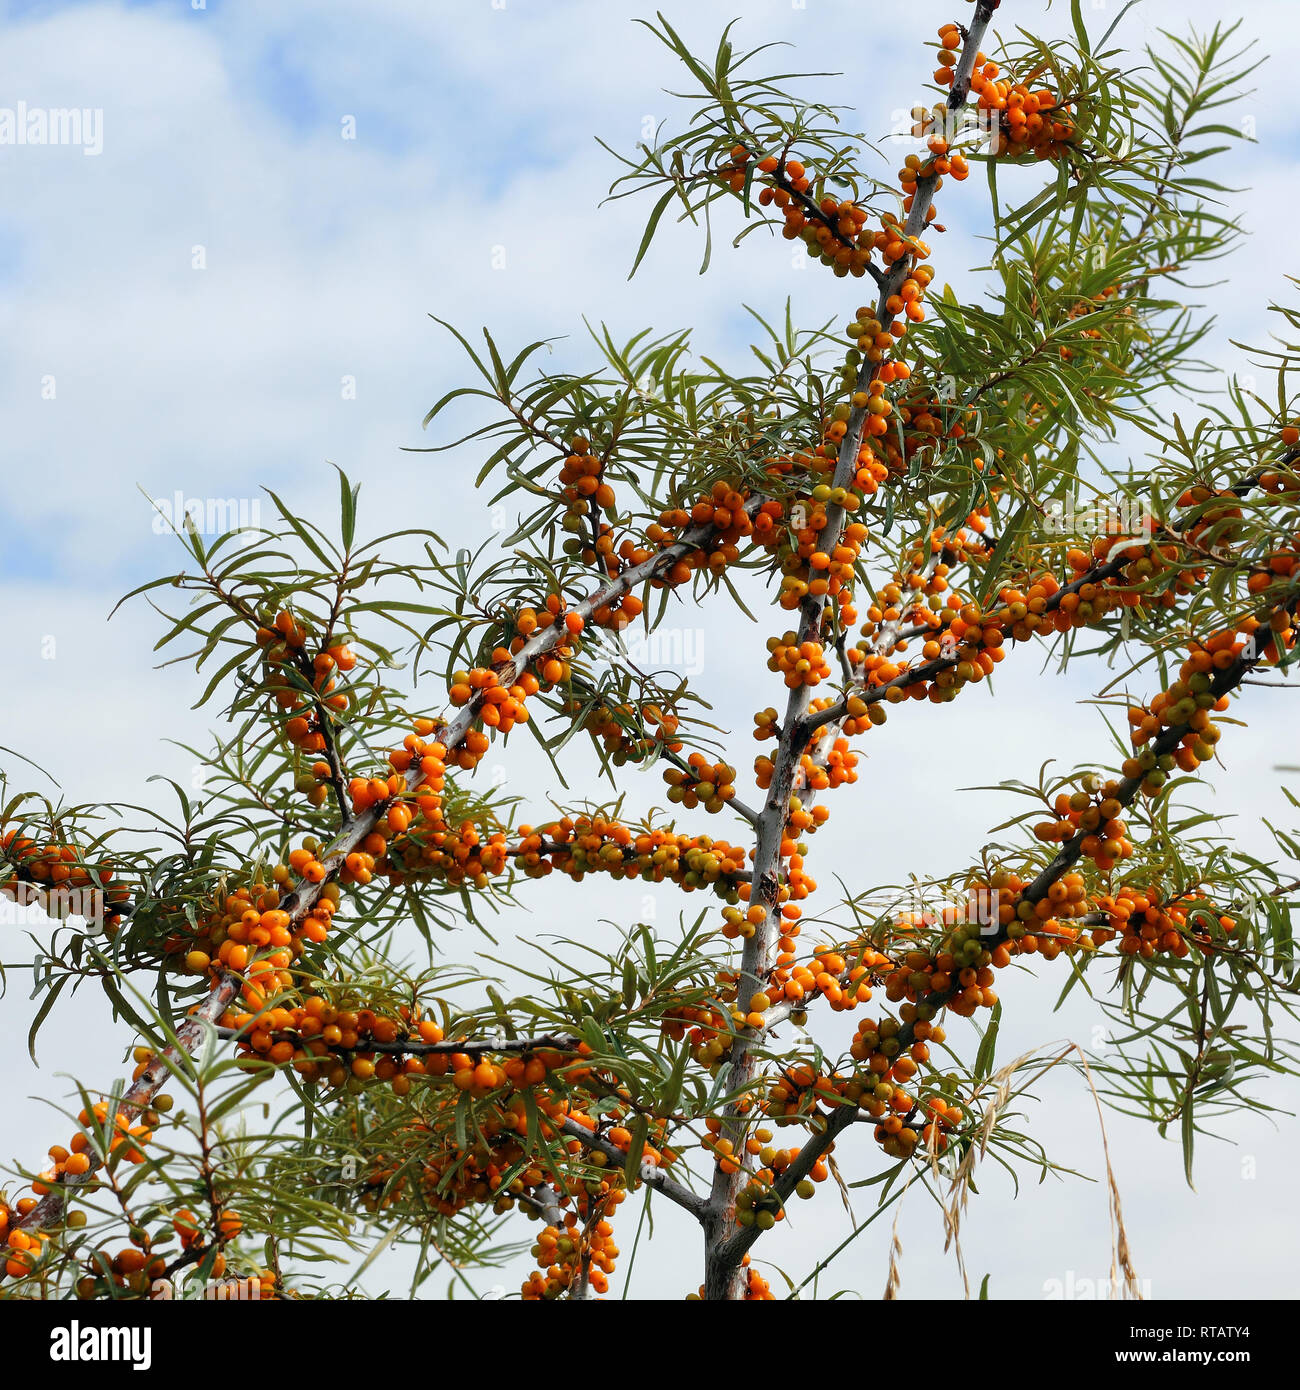 Branches of Sea-Buckhorn with fruits Stock Photo